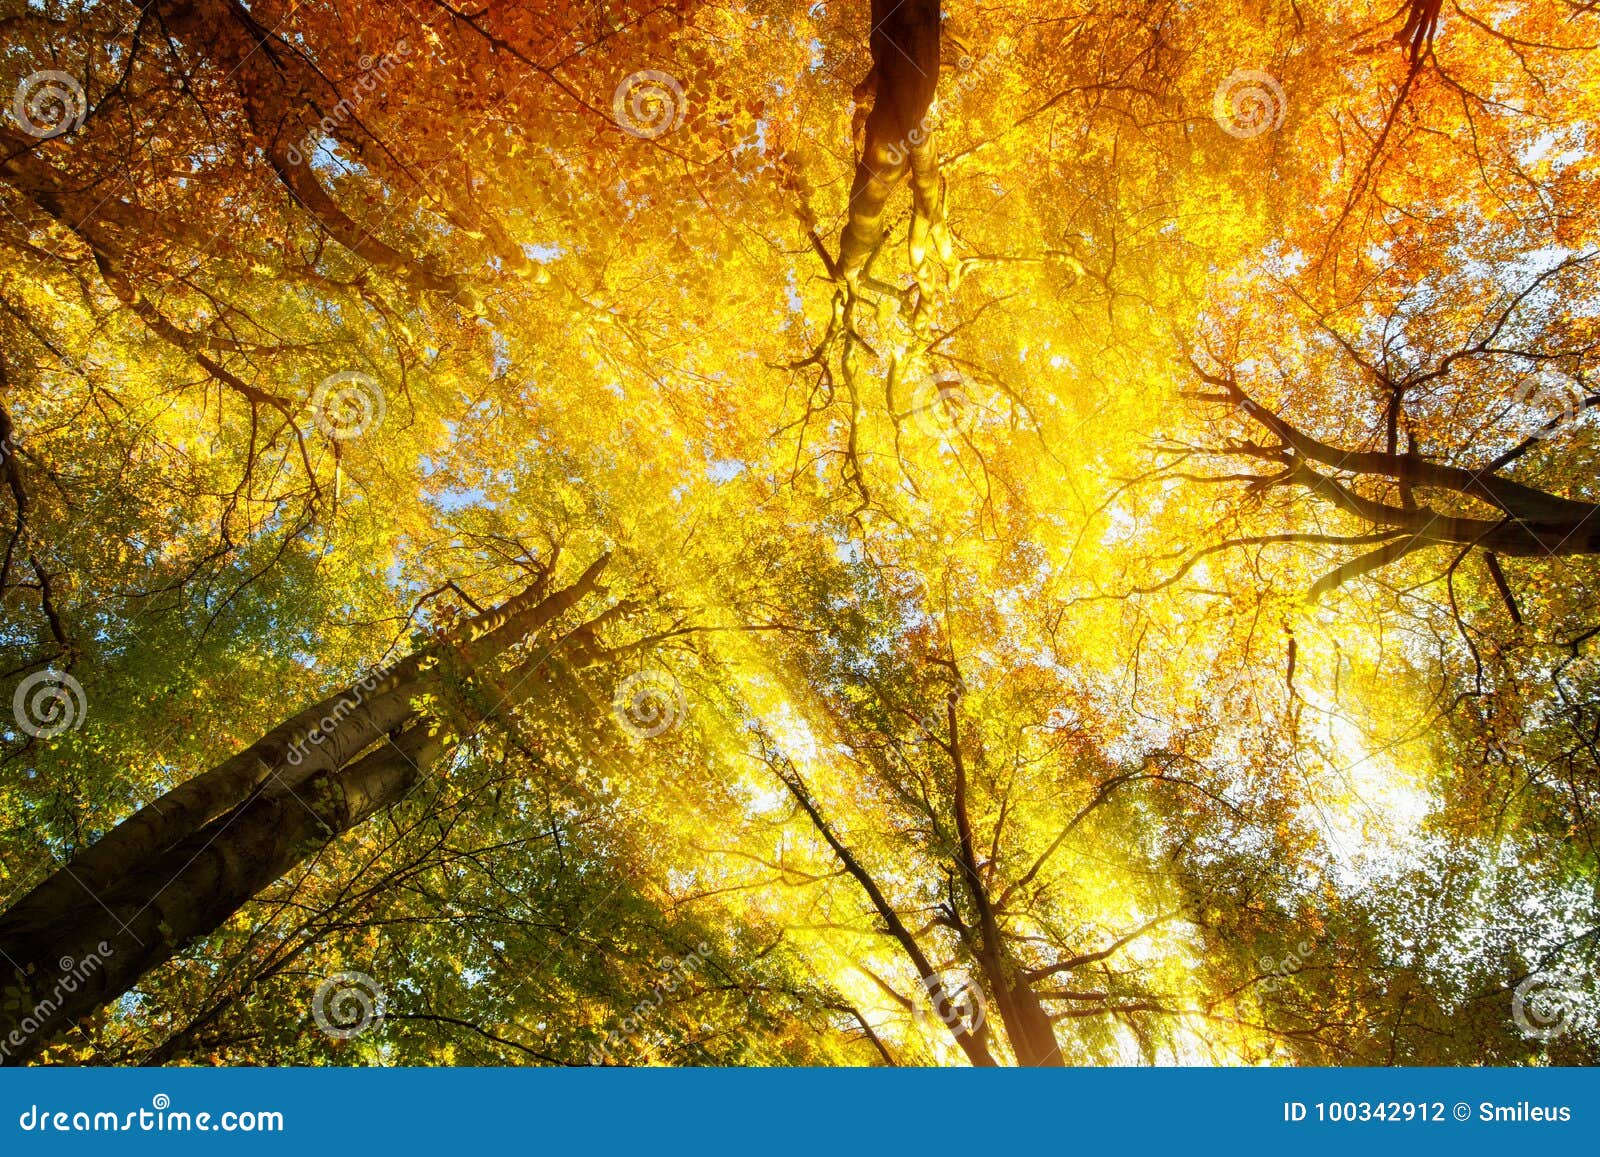 colorful tree canopy with sunrays in autumn